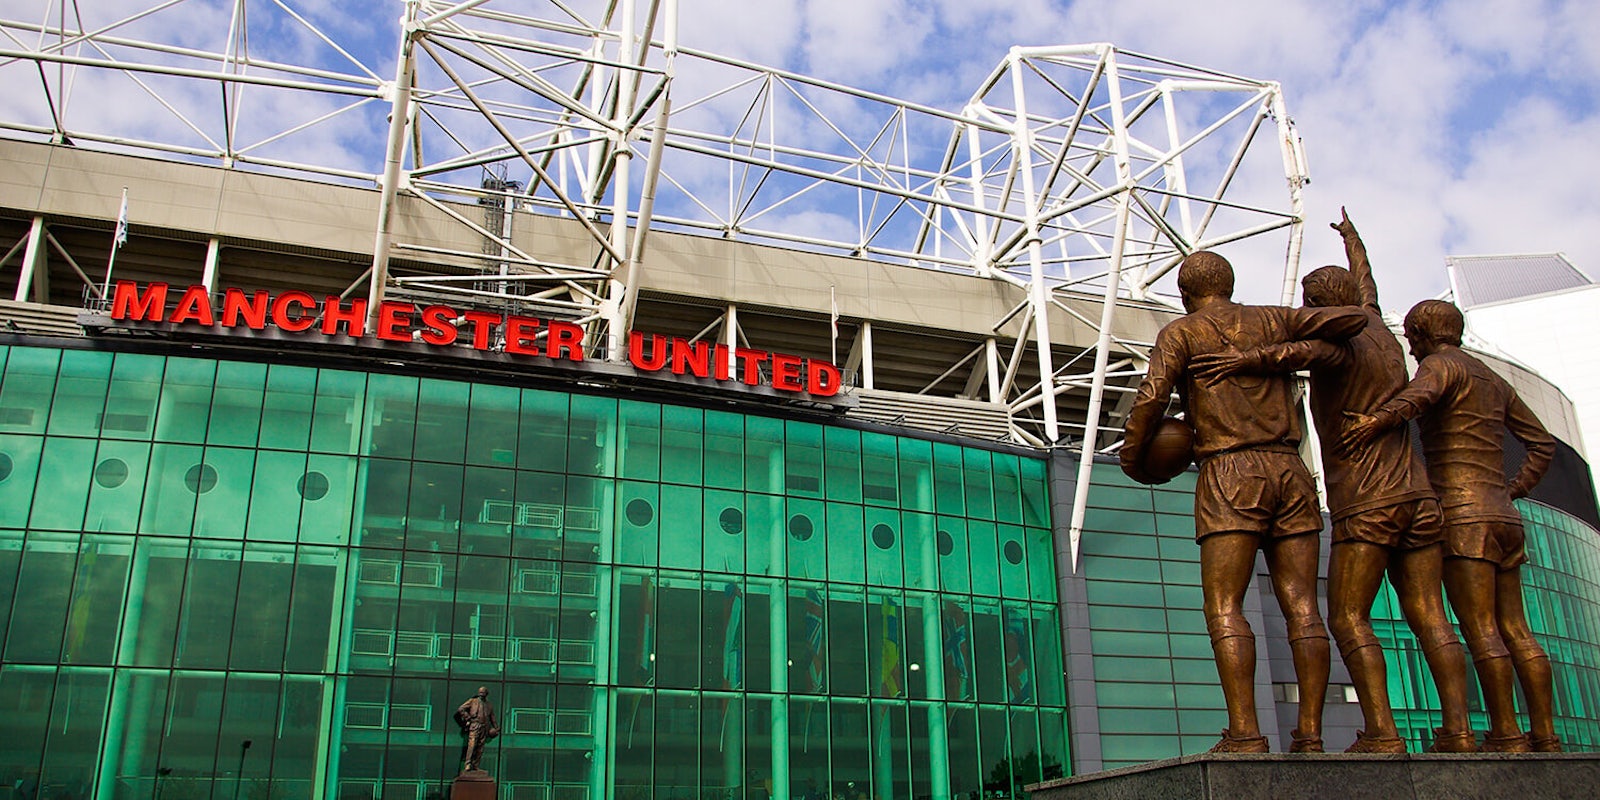 Old Trafford, home stadium of Manchester United